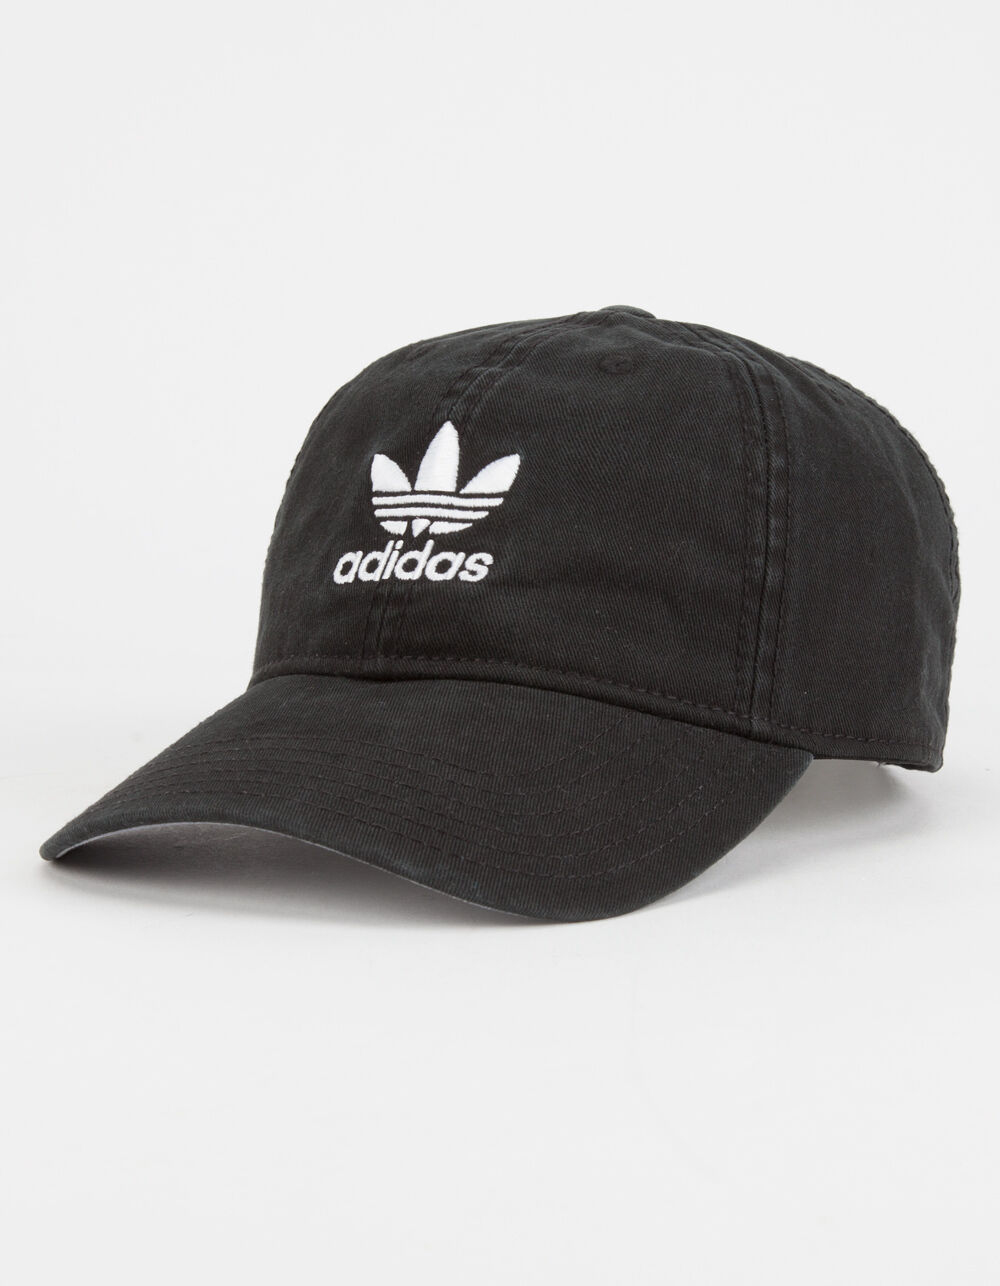 ADIDAS Originals Relaxed Womens Dad Hat image number 0